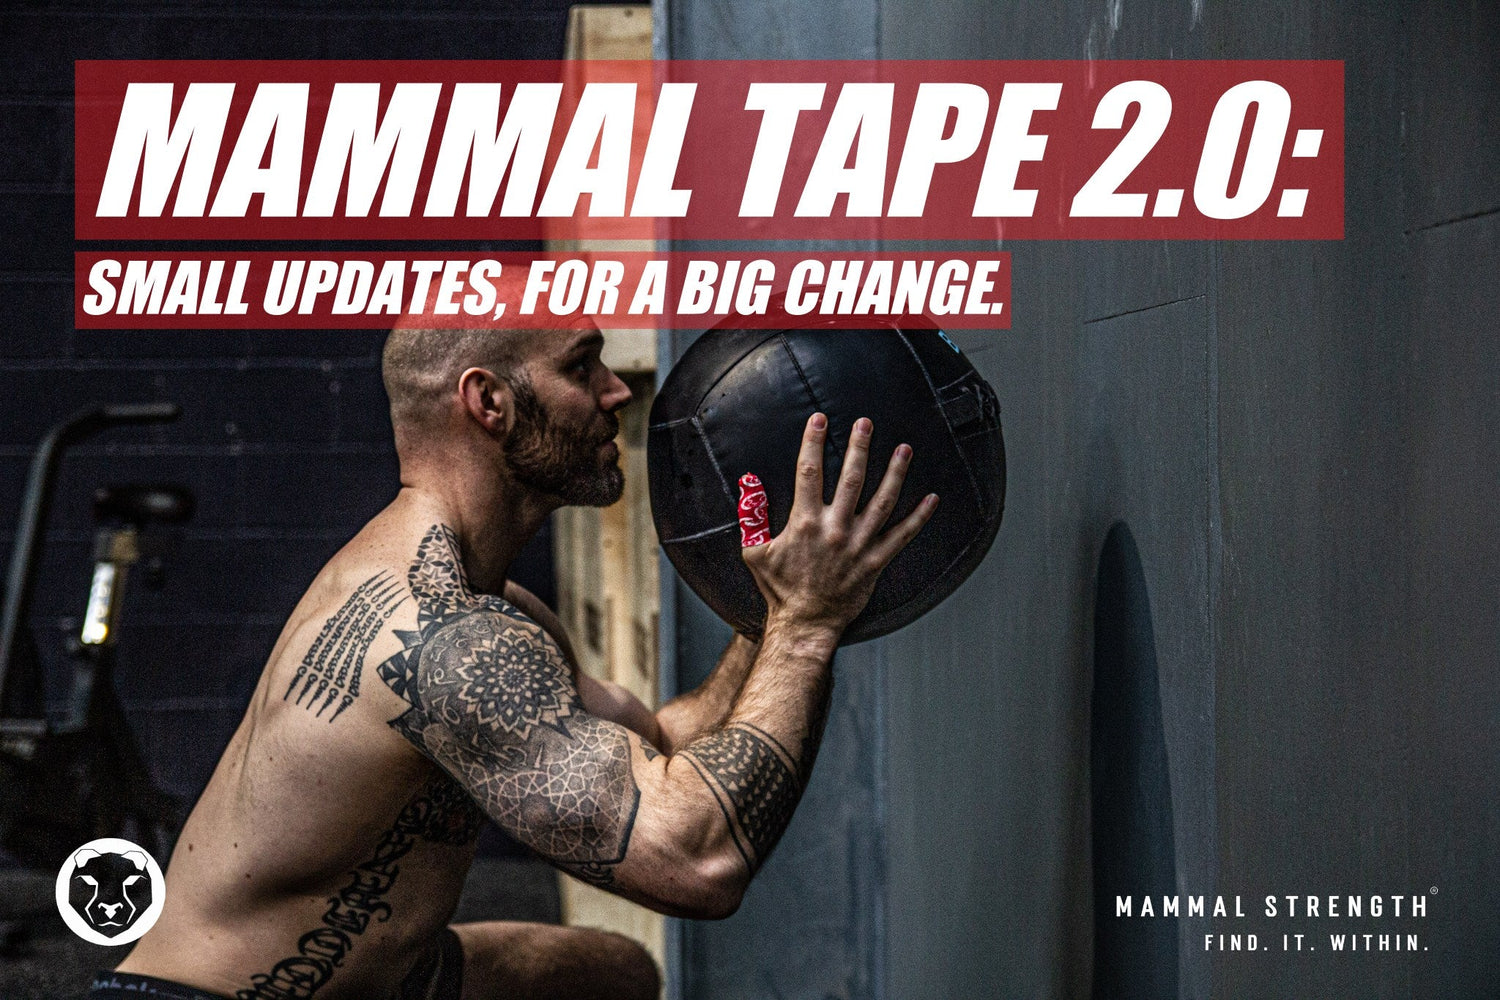 MAMMAL TAPE 2.0: SMALL UPDATES, FOR A BIG CHANGE. - Mammal Strength